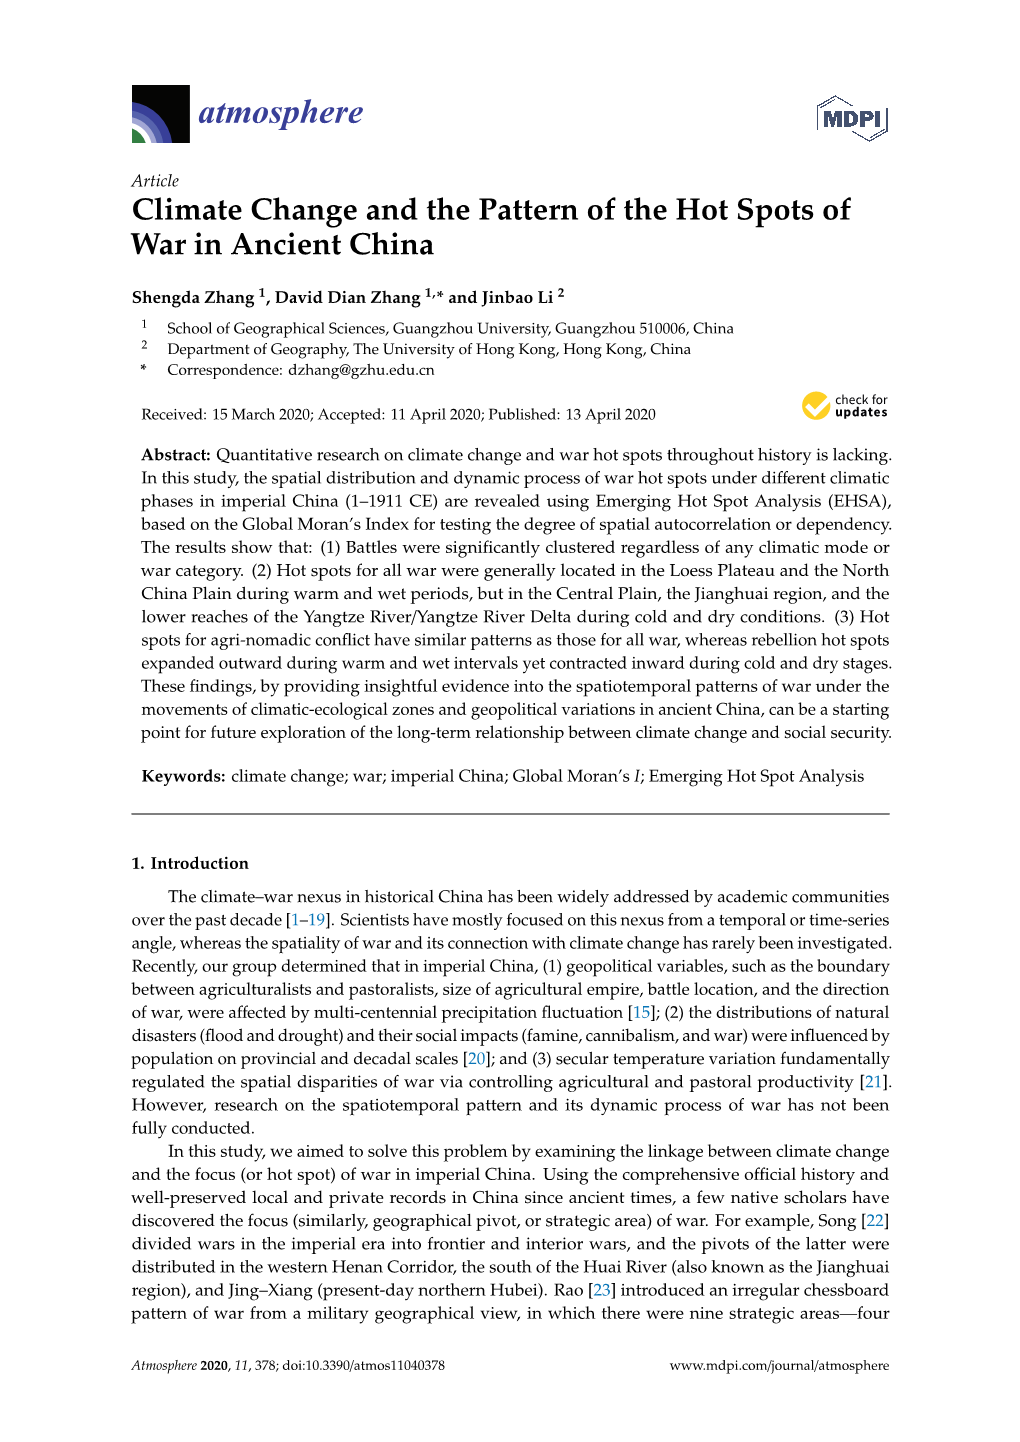 Climate Change and the Pattern of the Hot Spots of War in Ancient China